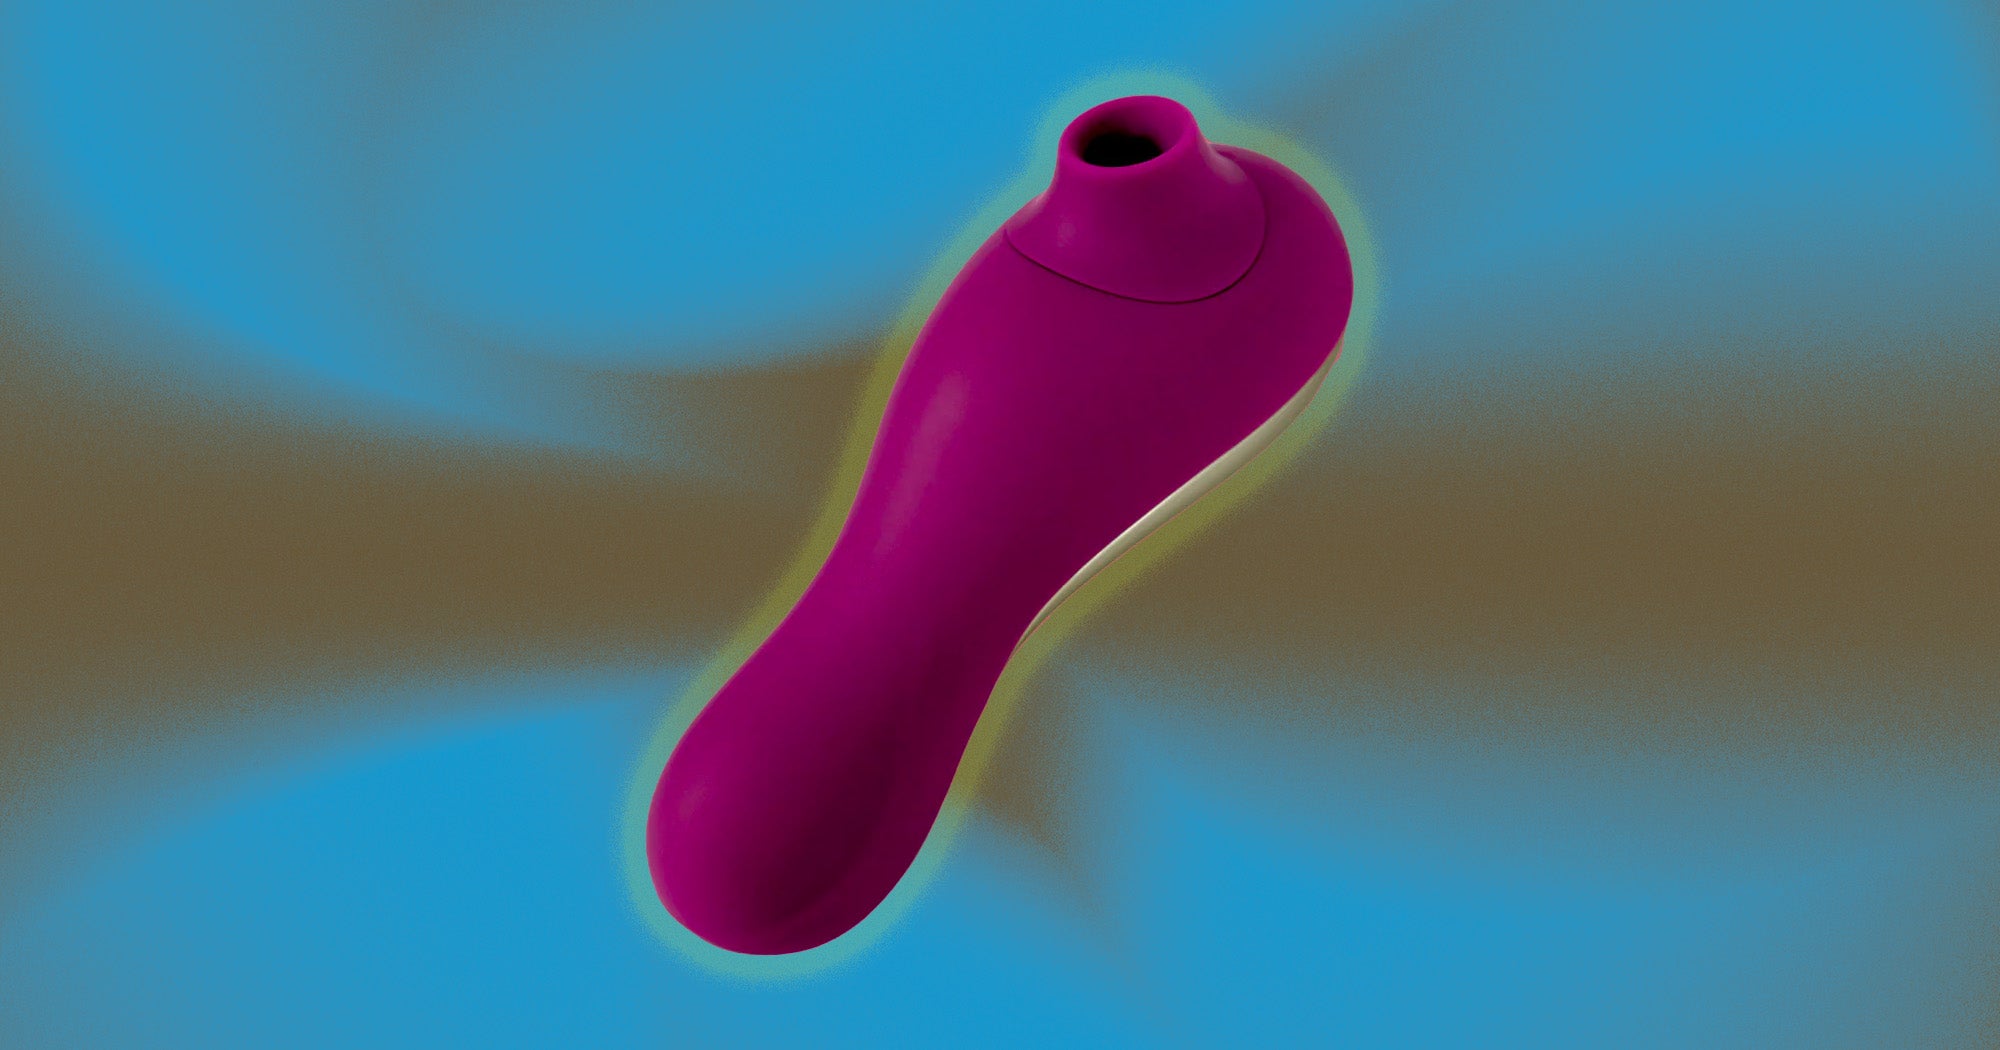 Tracy's Dog Clitoral Sucking Vibrator for Clit G Spot Stimulation, 2 in 1  Sex Toys for Women, 5 Suction and Vibration Patterns - Discreet Packaging